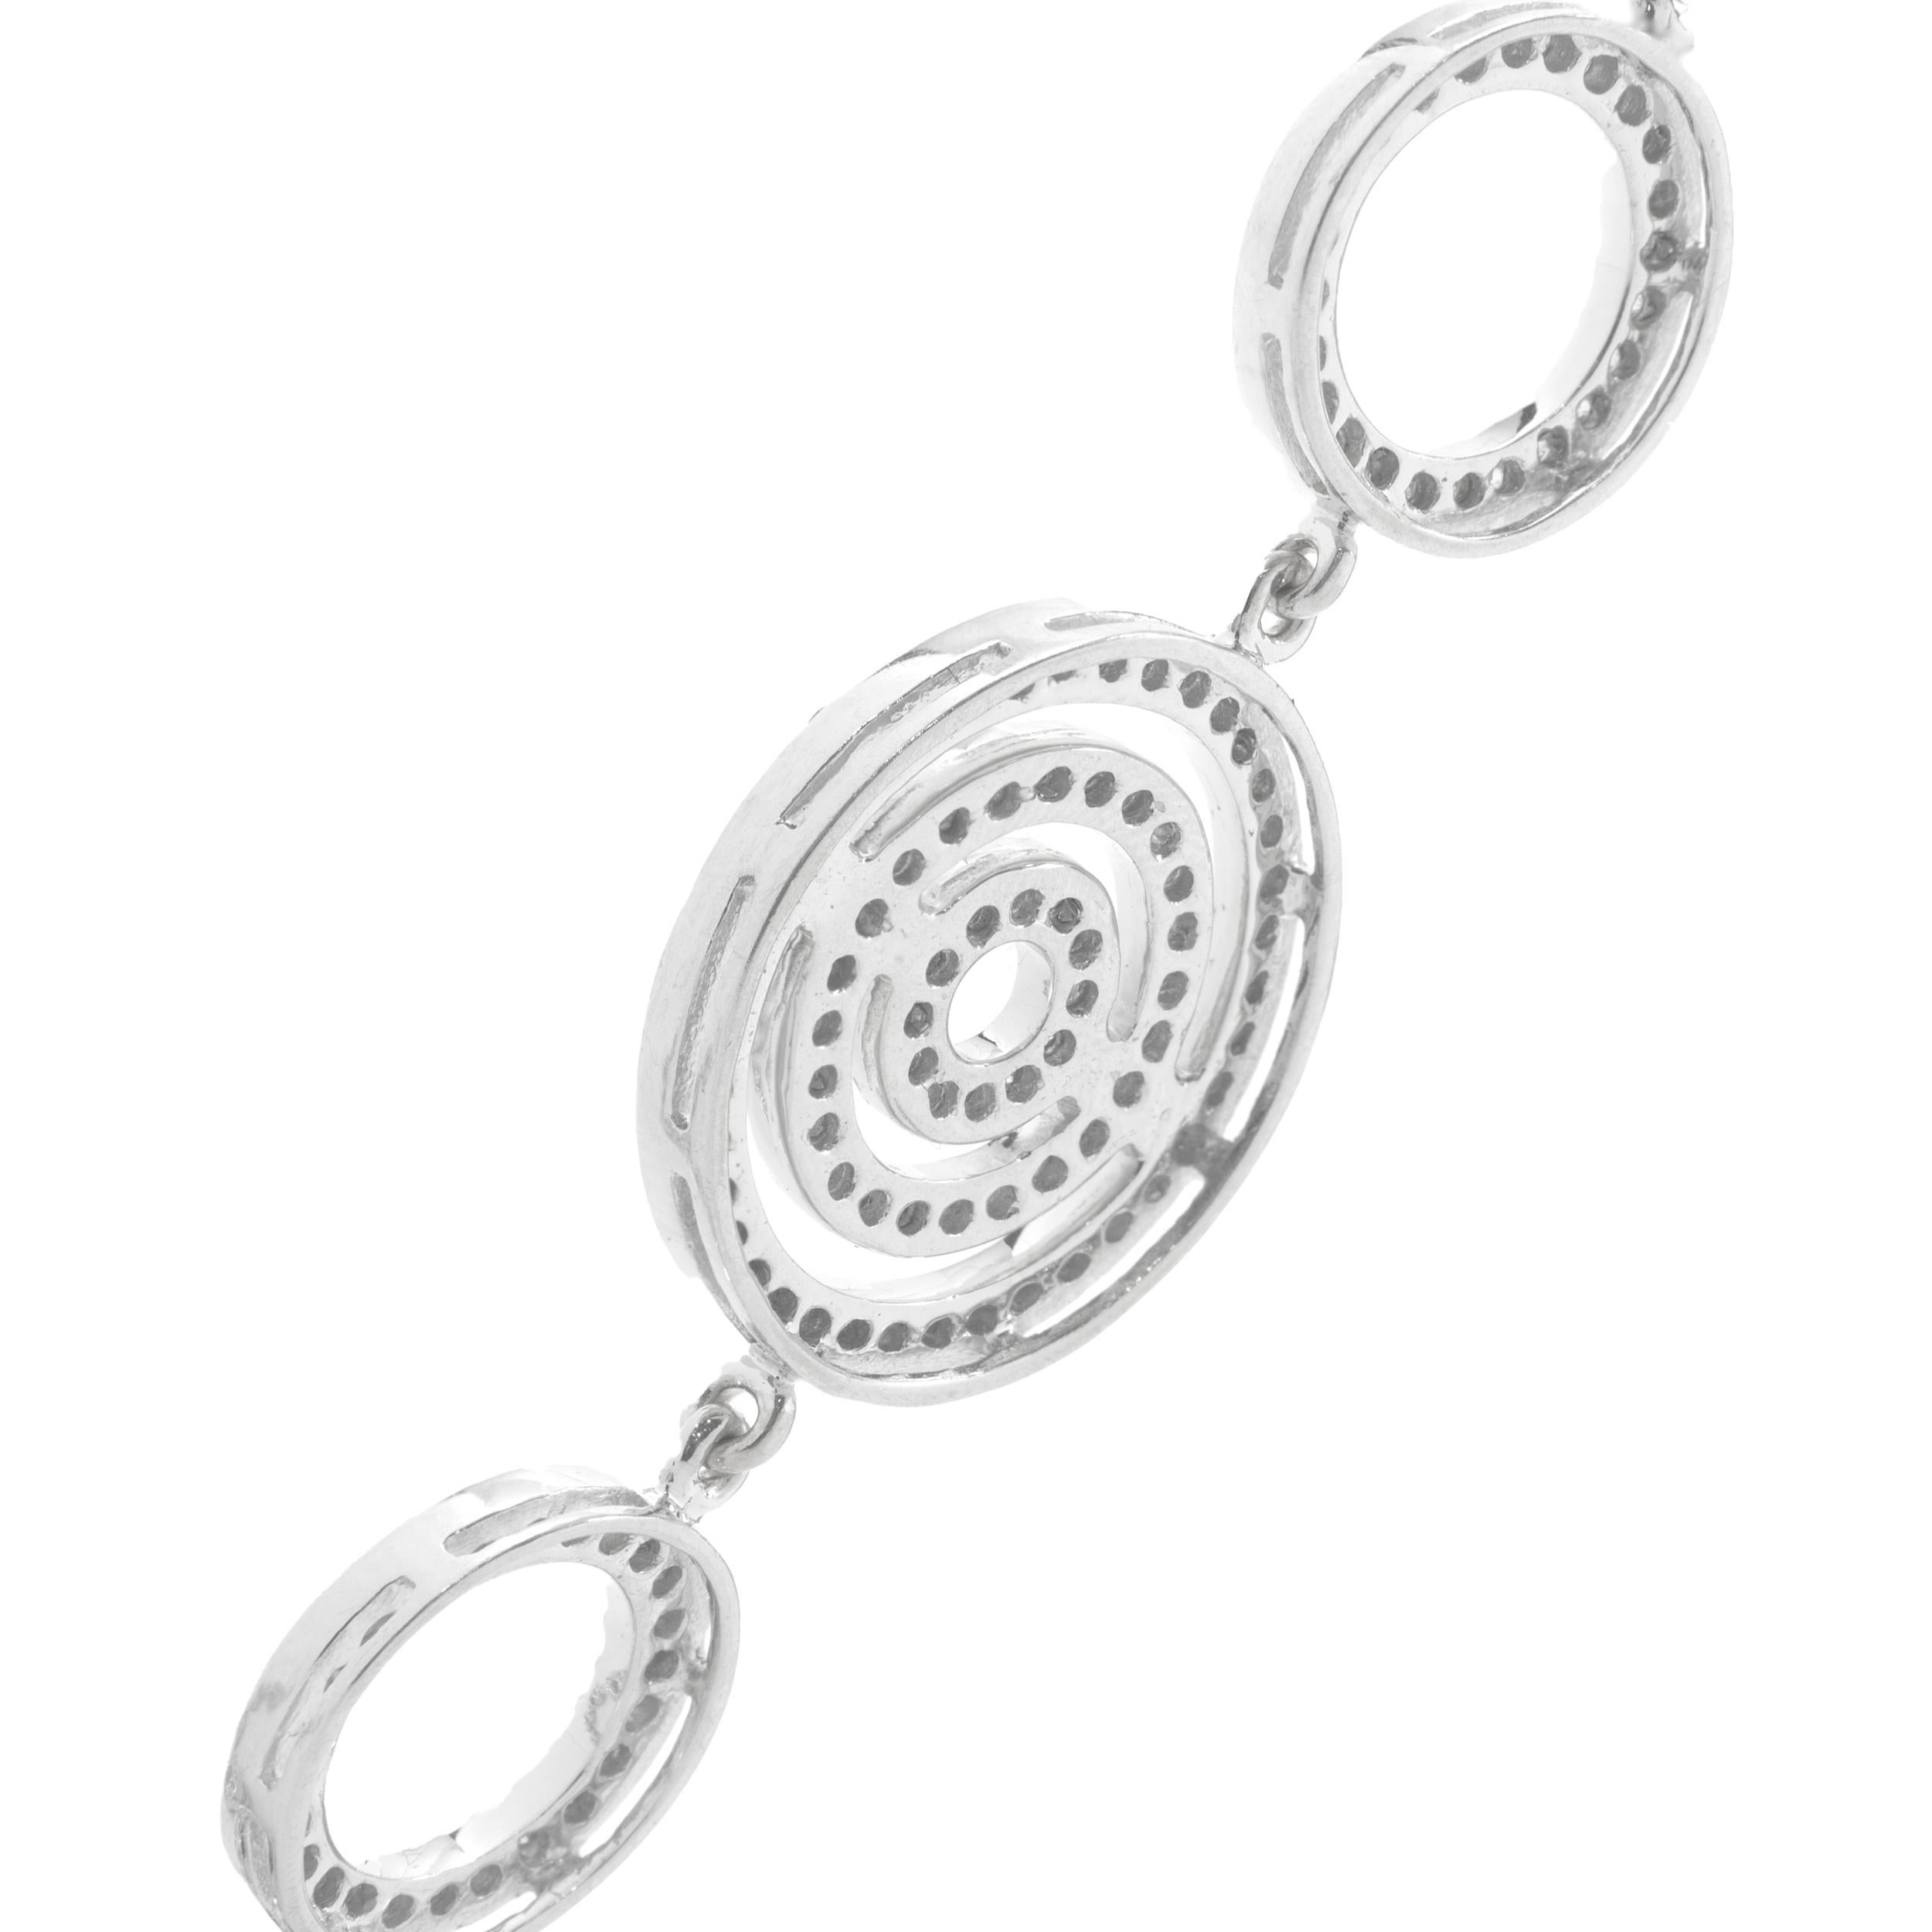 Designer: custom
Material: 14K white gold
Diamonds: 243 round brilliant cut = 3.64cttw
Color: H
Clarity: SI2
Dimensions: bracelet will fit up to a 7.25-inch wrist
Weight: 15.09 grams
